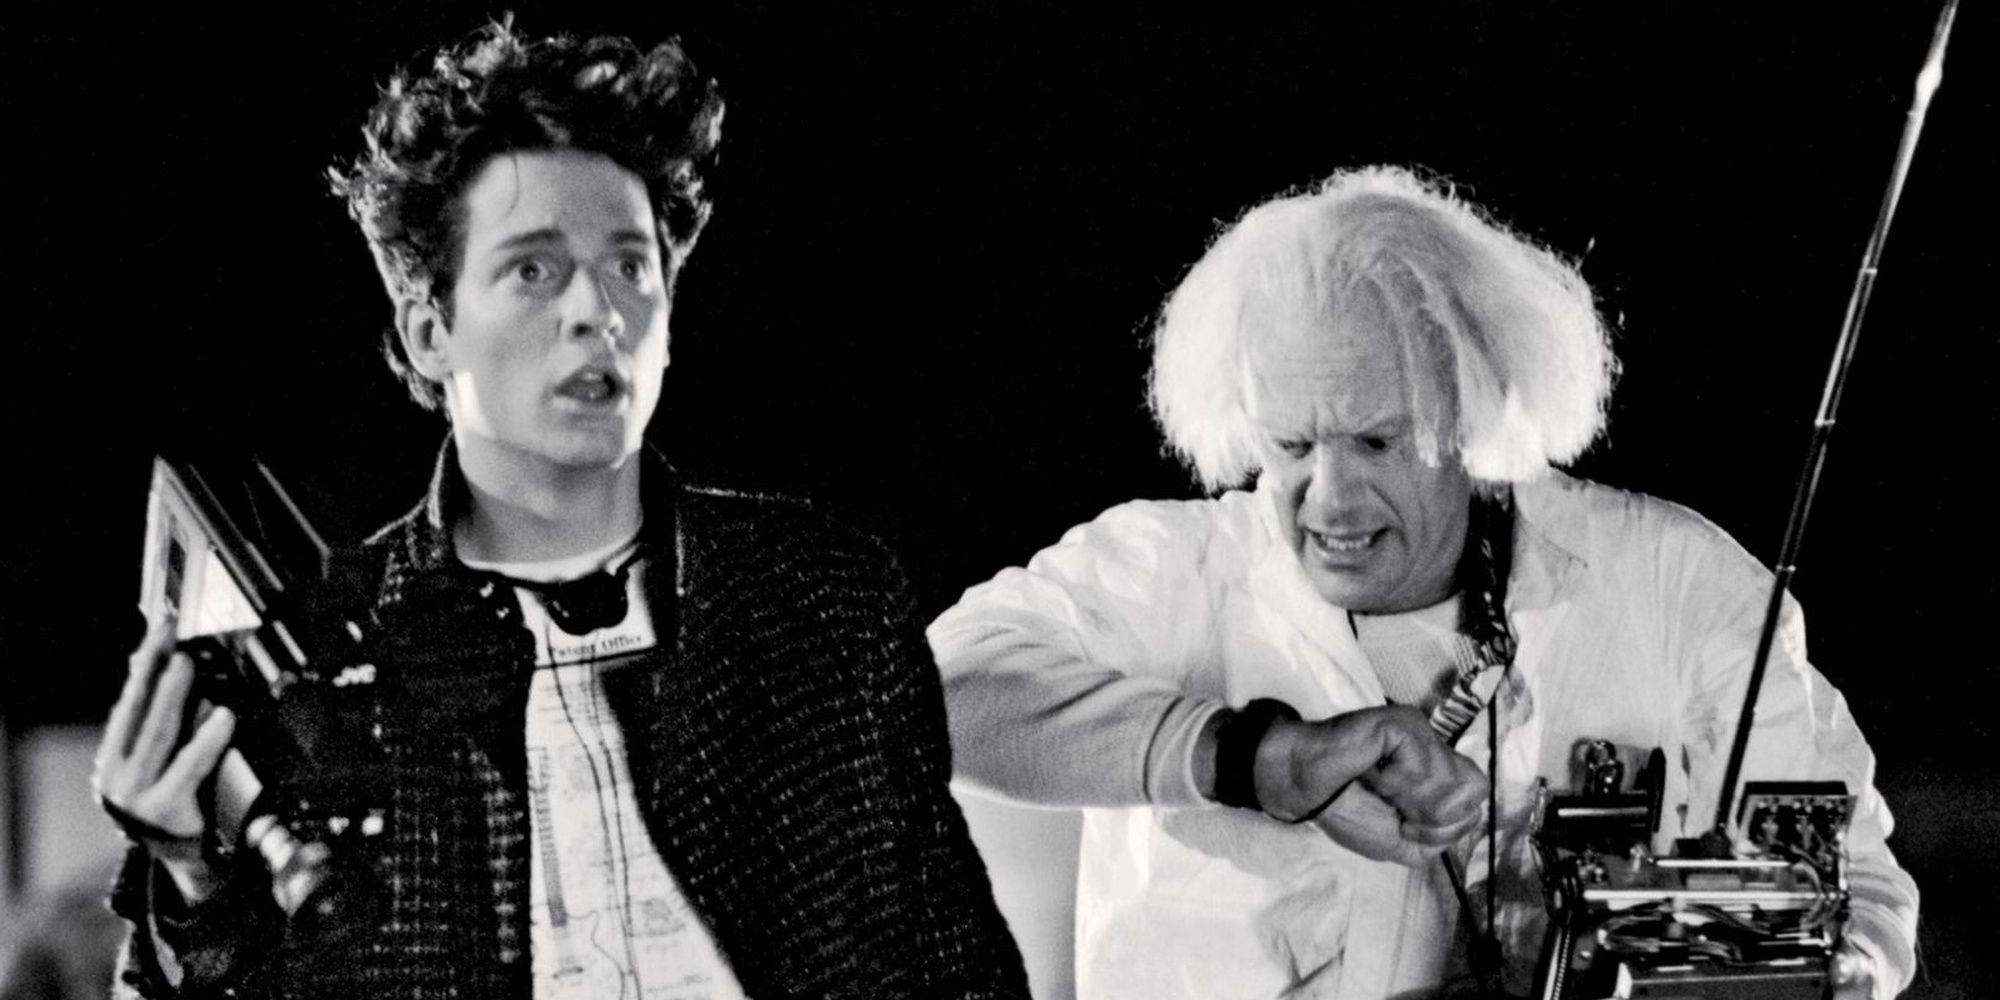 10 Things Back To The Future Part II Got Right About The Future